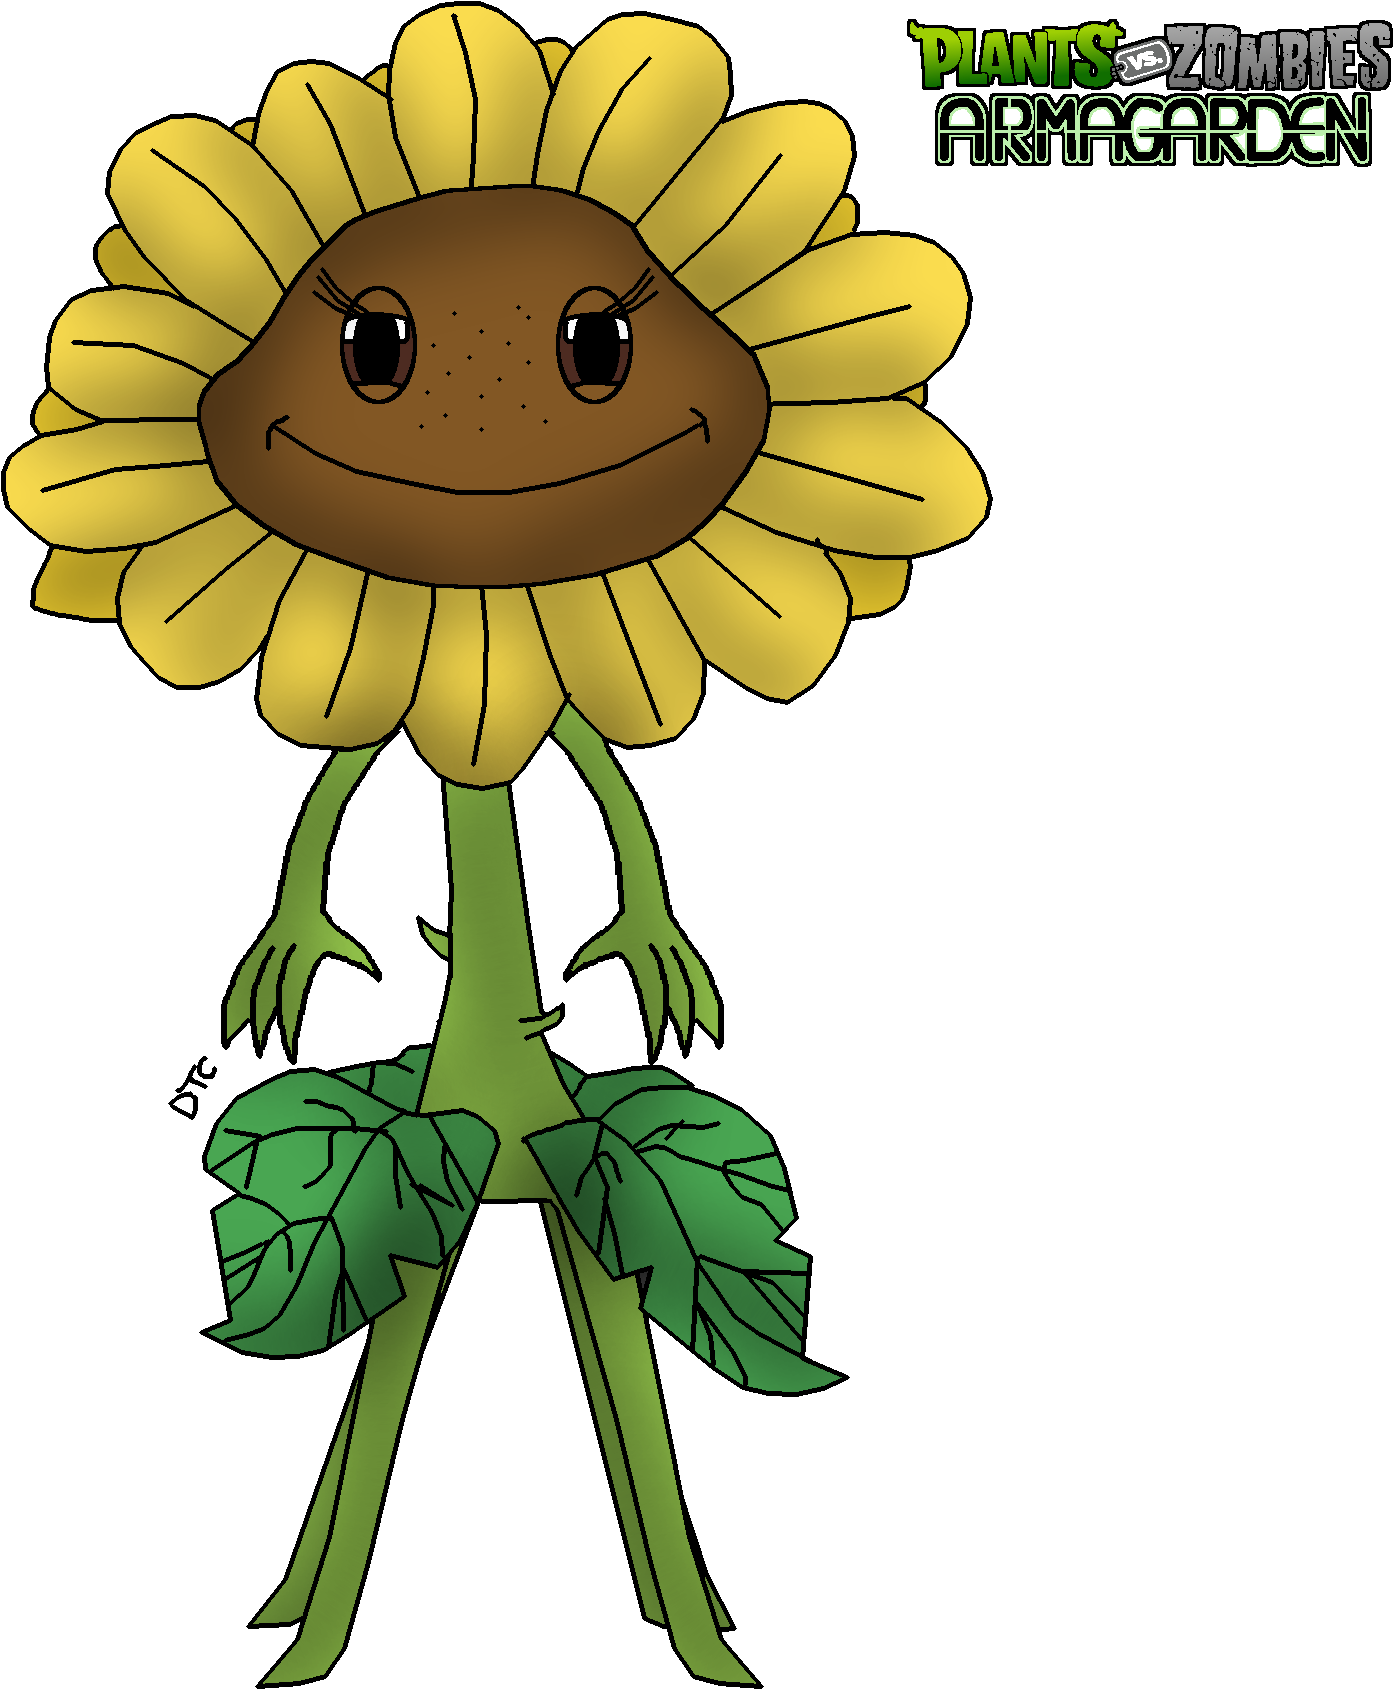 Plants Vs Zombies Peashooter And Sunflower Wwwimgkid - Rose Supreme Armagarden (1495x1893)